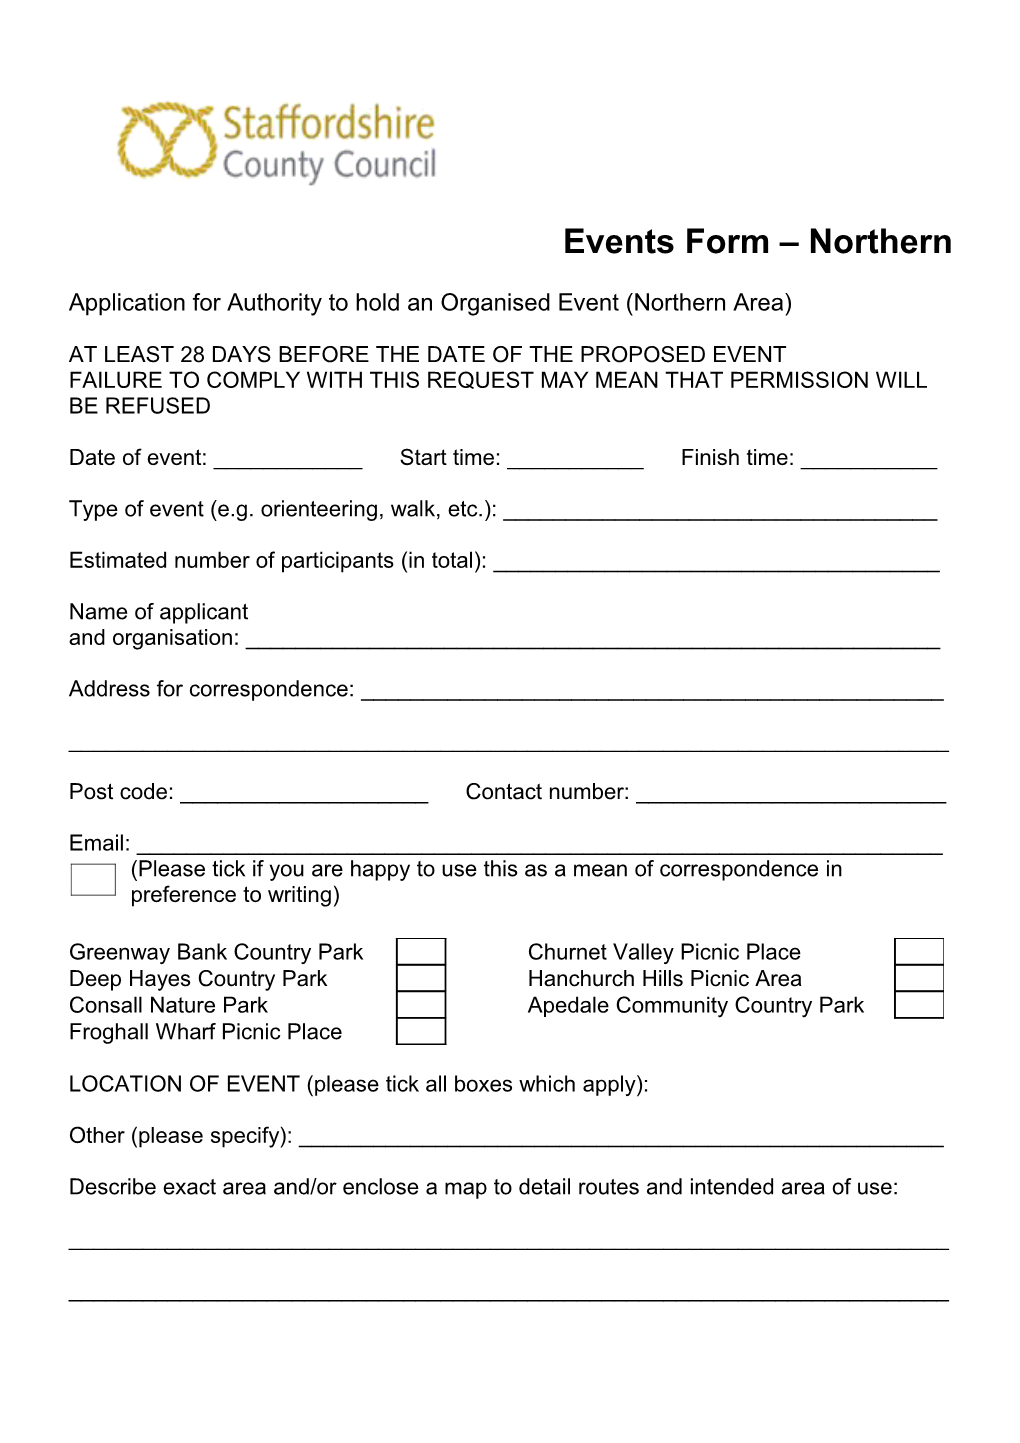 Events Form Northern